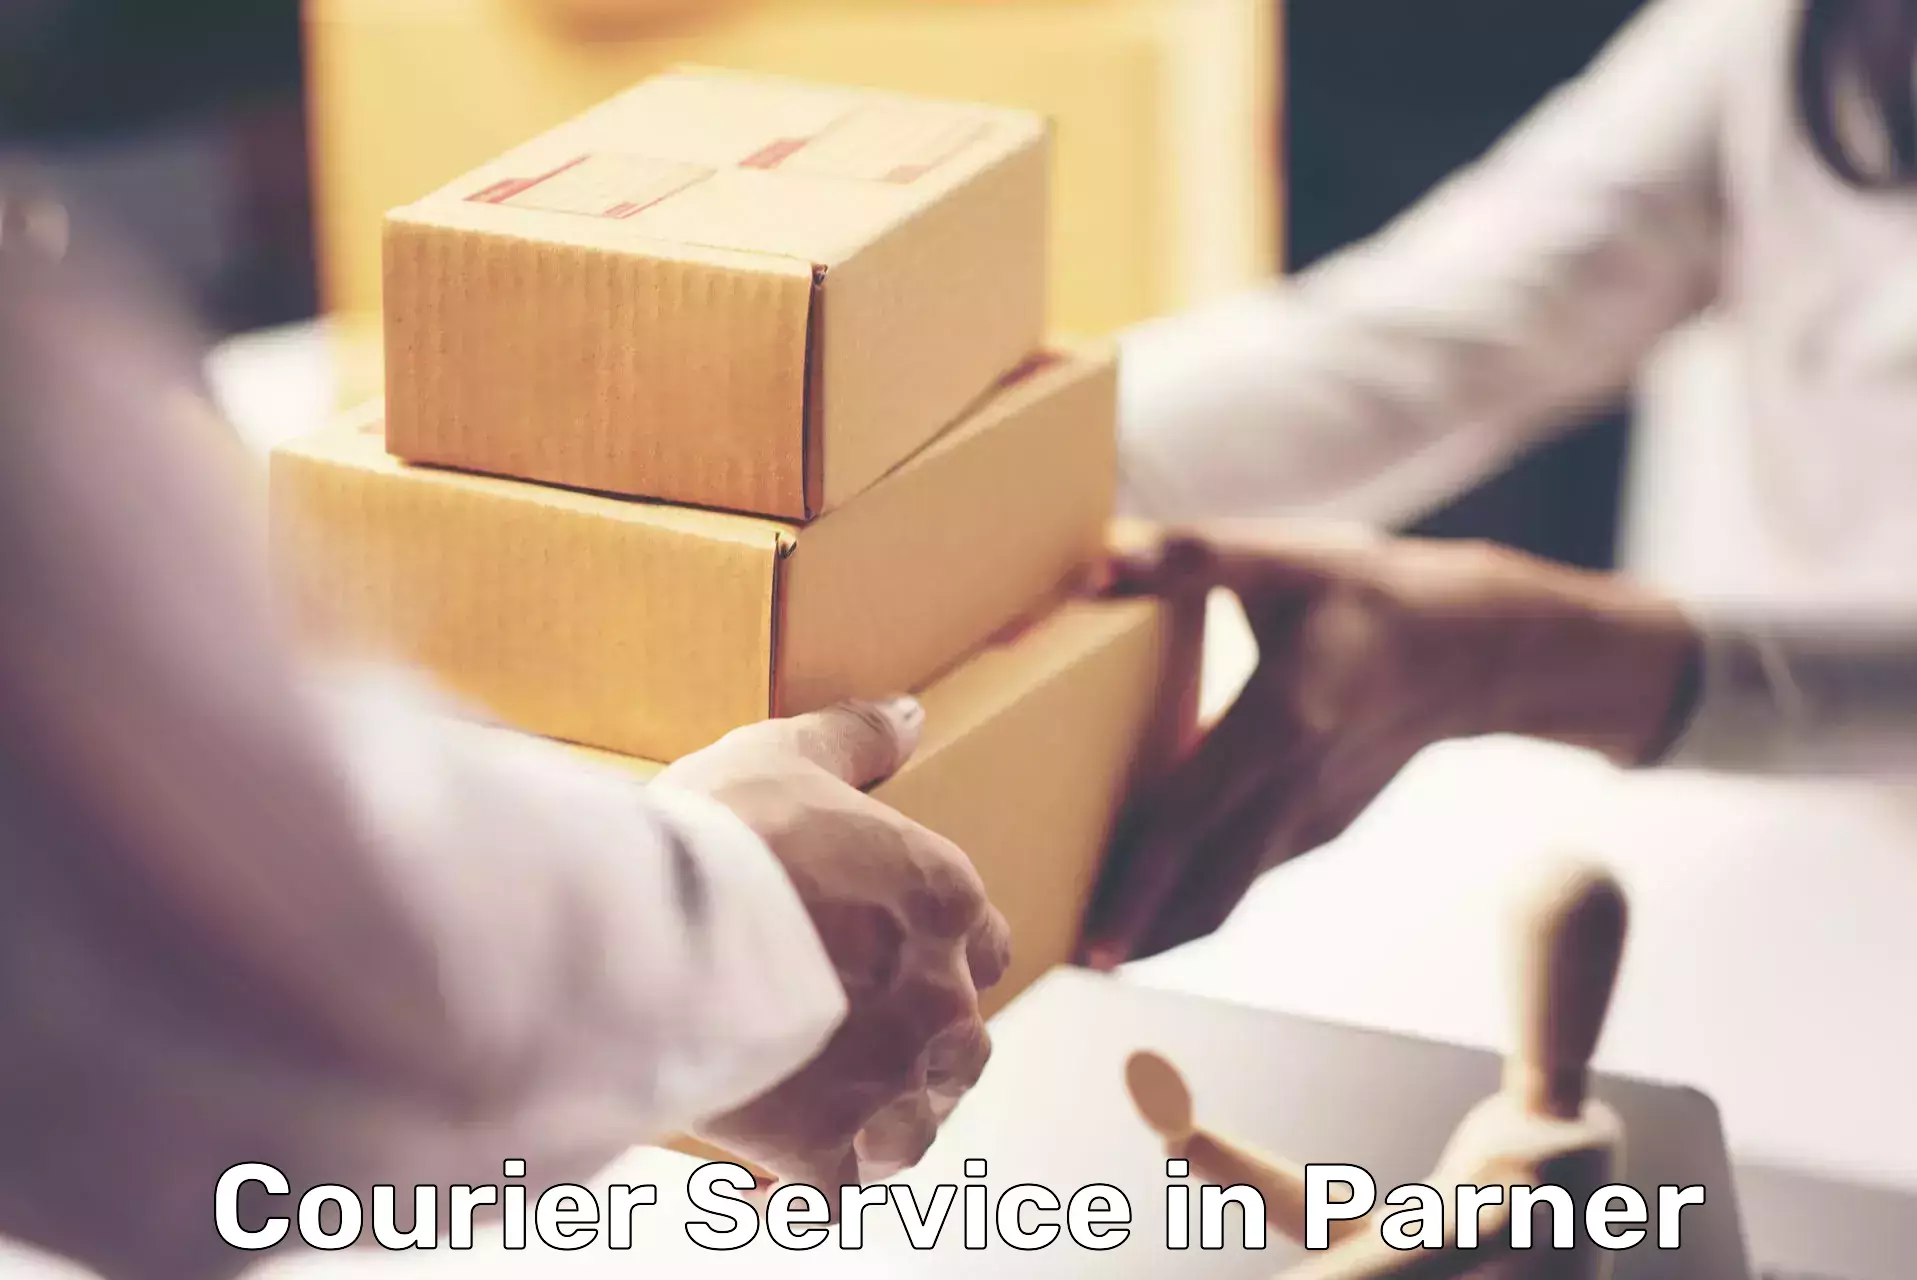 Next-day delivery options in Parner